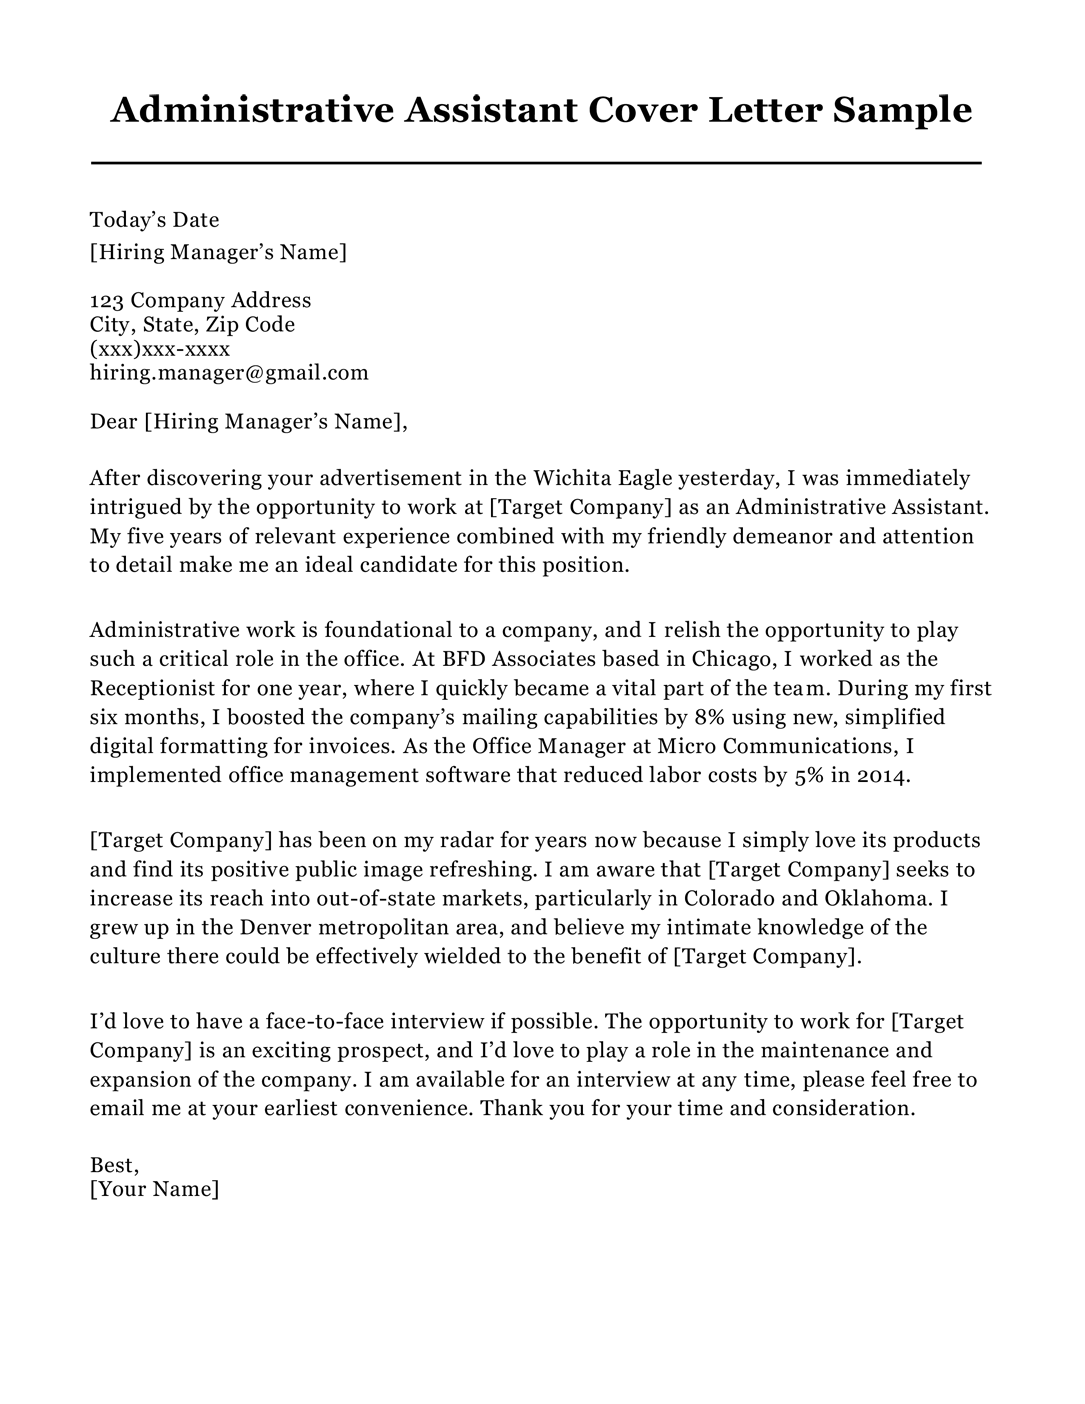 Administrative Assistant Cover Letter Sample from resumecompanion.com